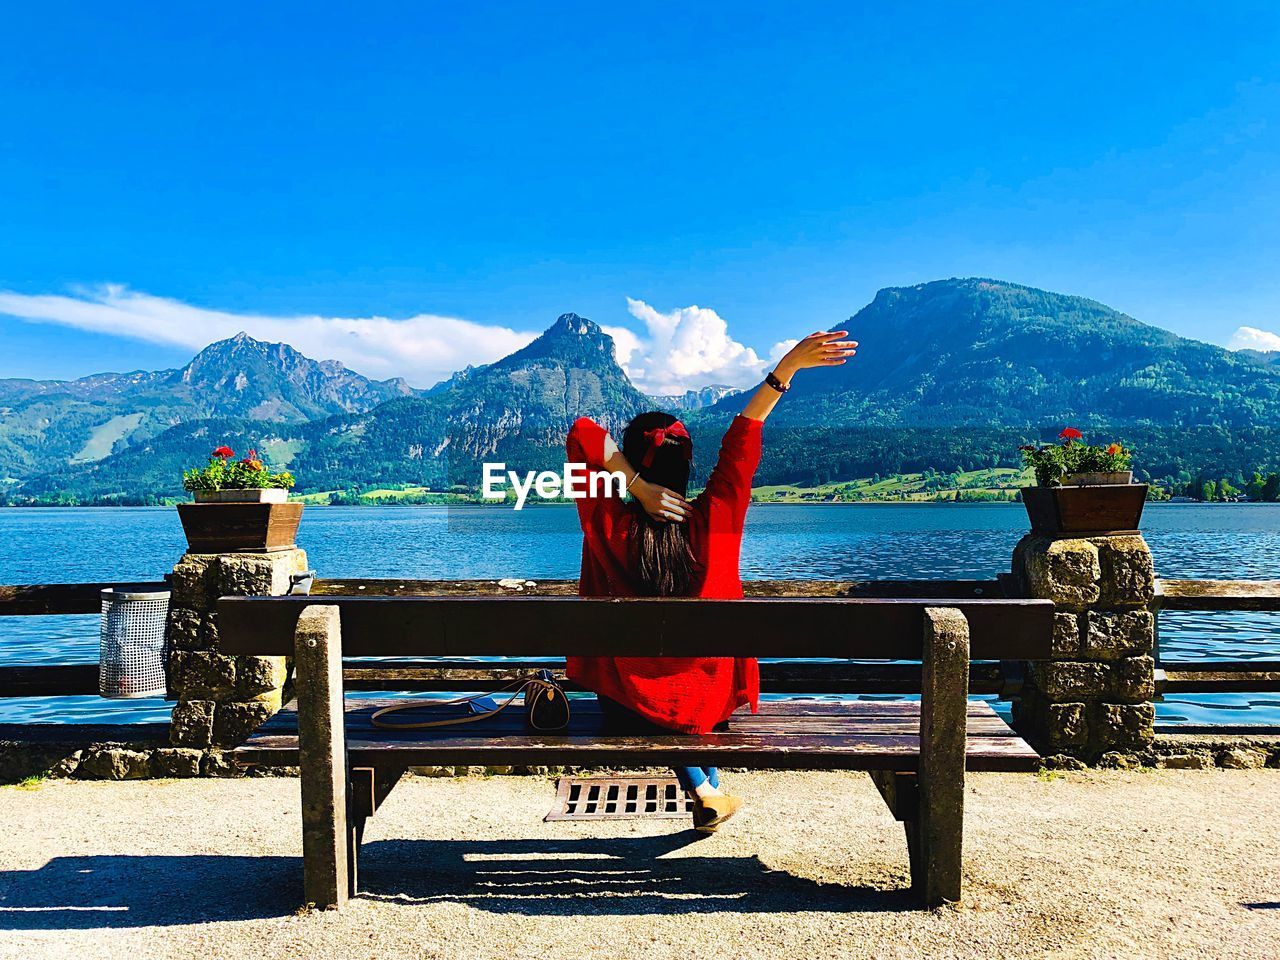 Rear view of woman sitting on bench by river against mountains